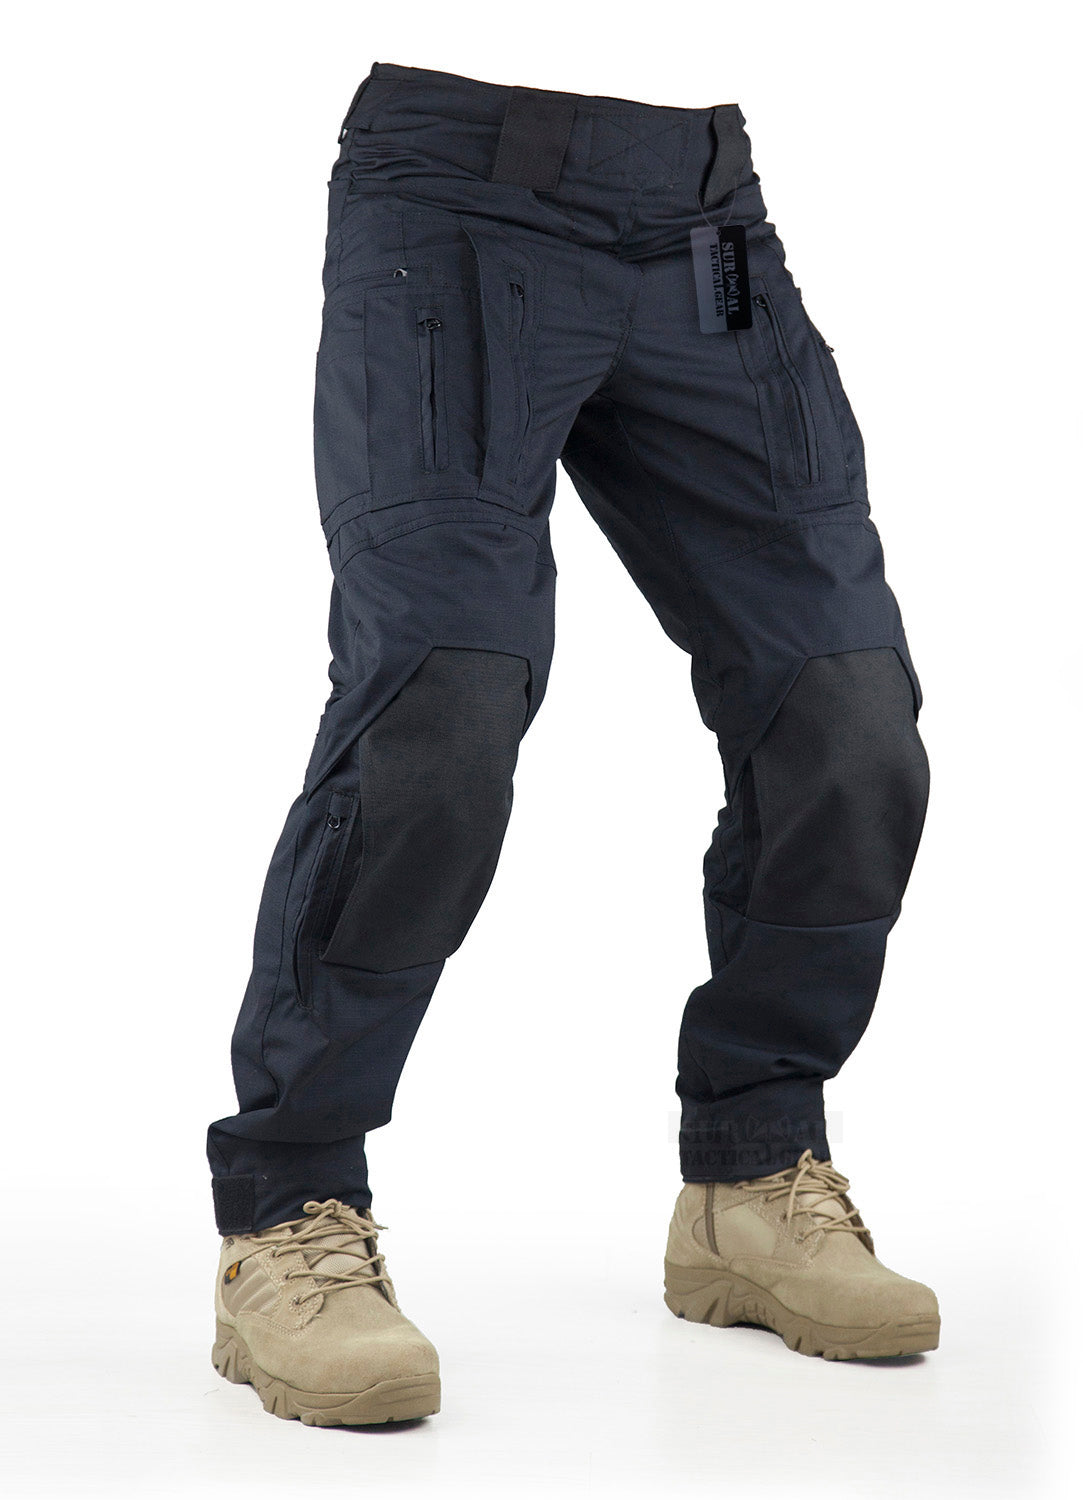 Survival Tactical Pants with Knee Pads – ZAPTGEAR